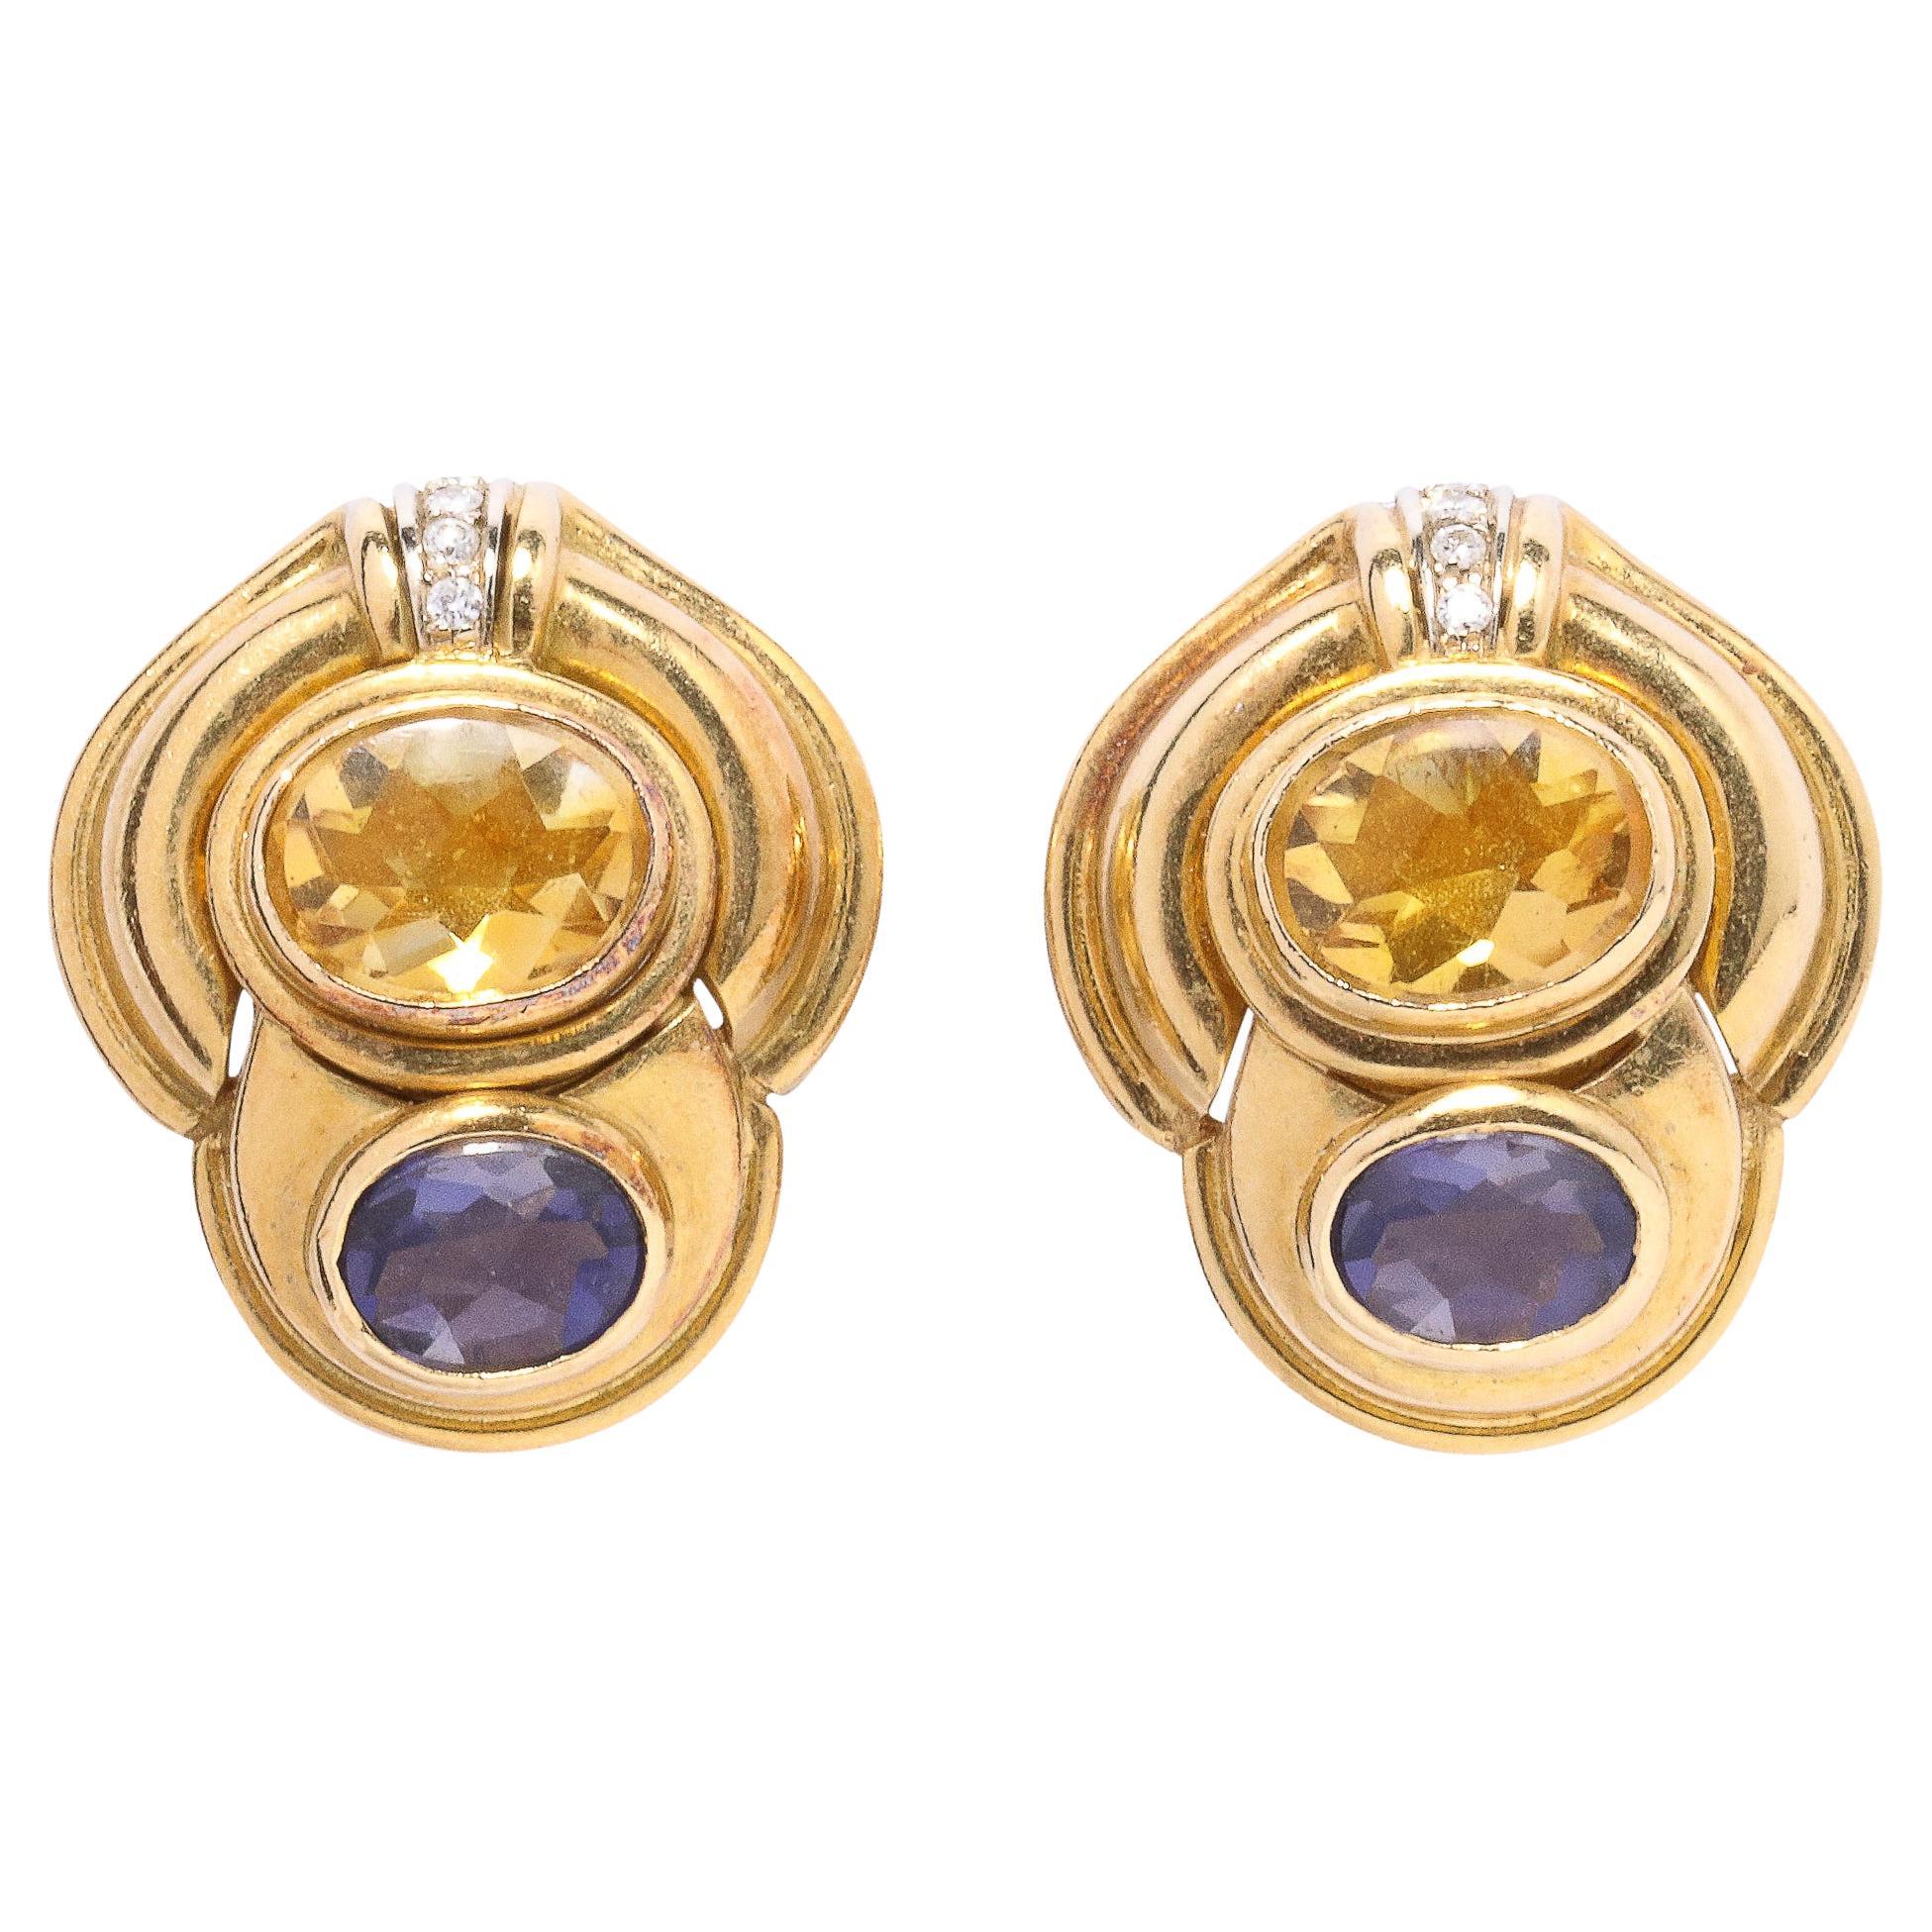 Pair of Citrine, Iolite, Diamond and 18k Yellow Gold Earrings 